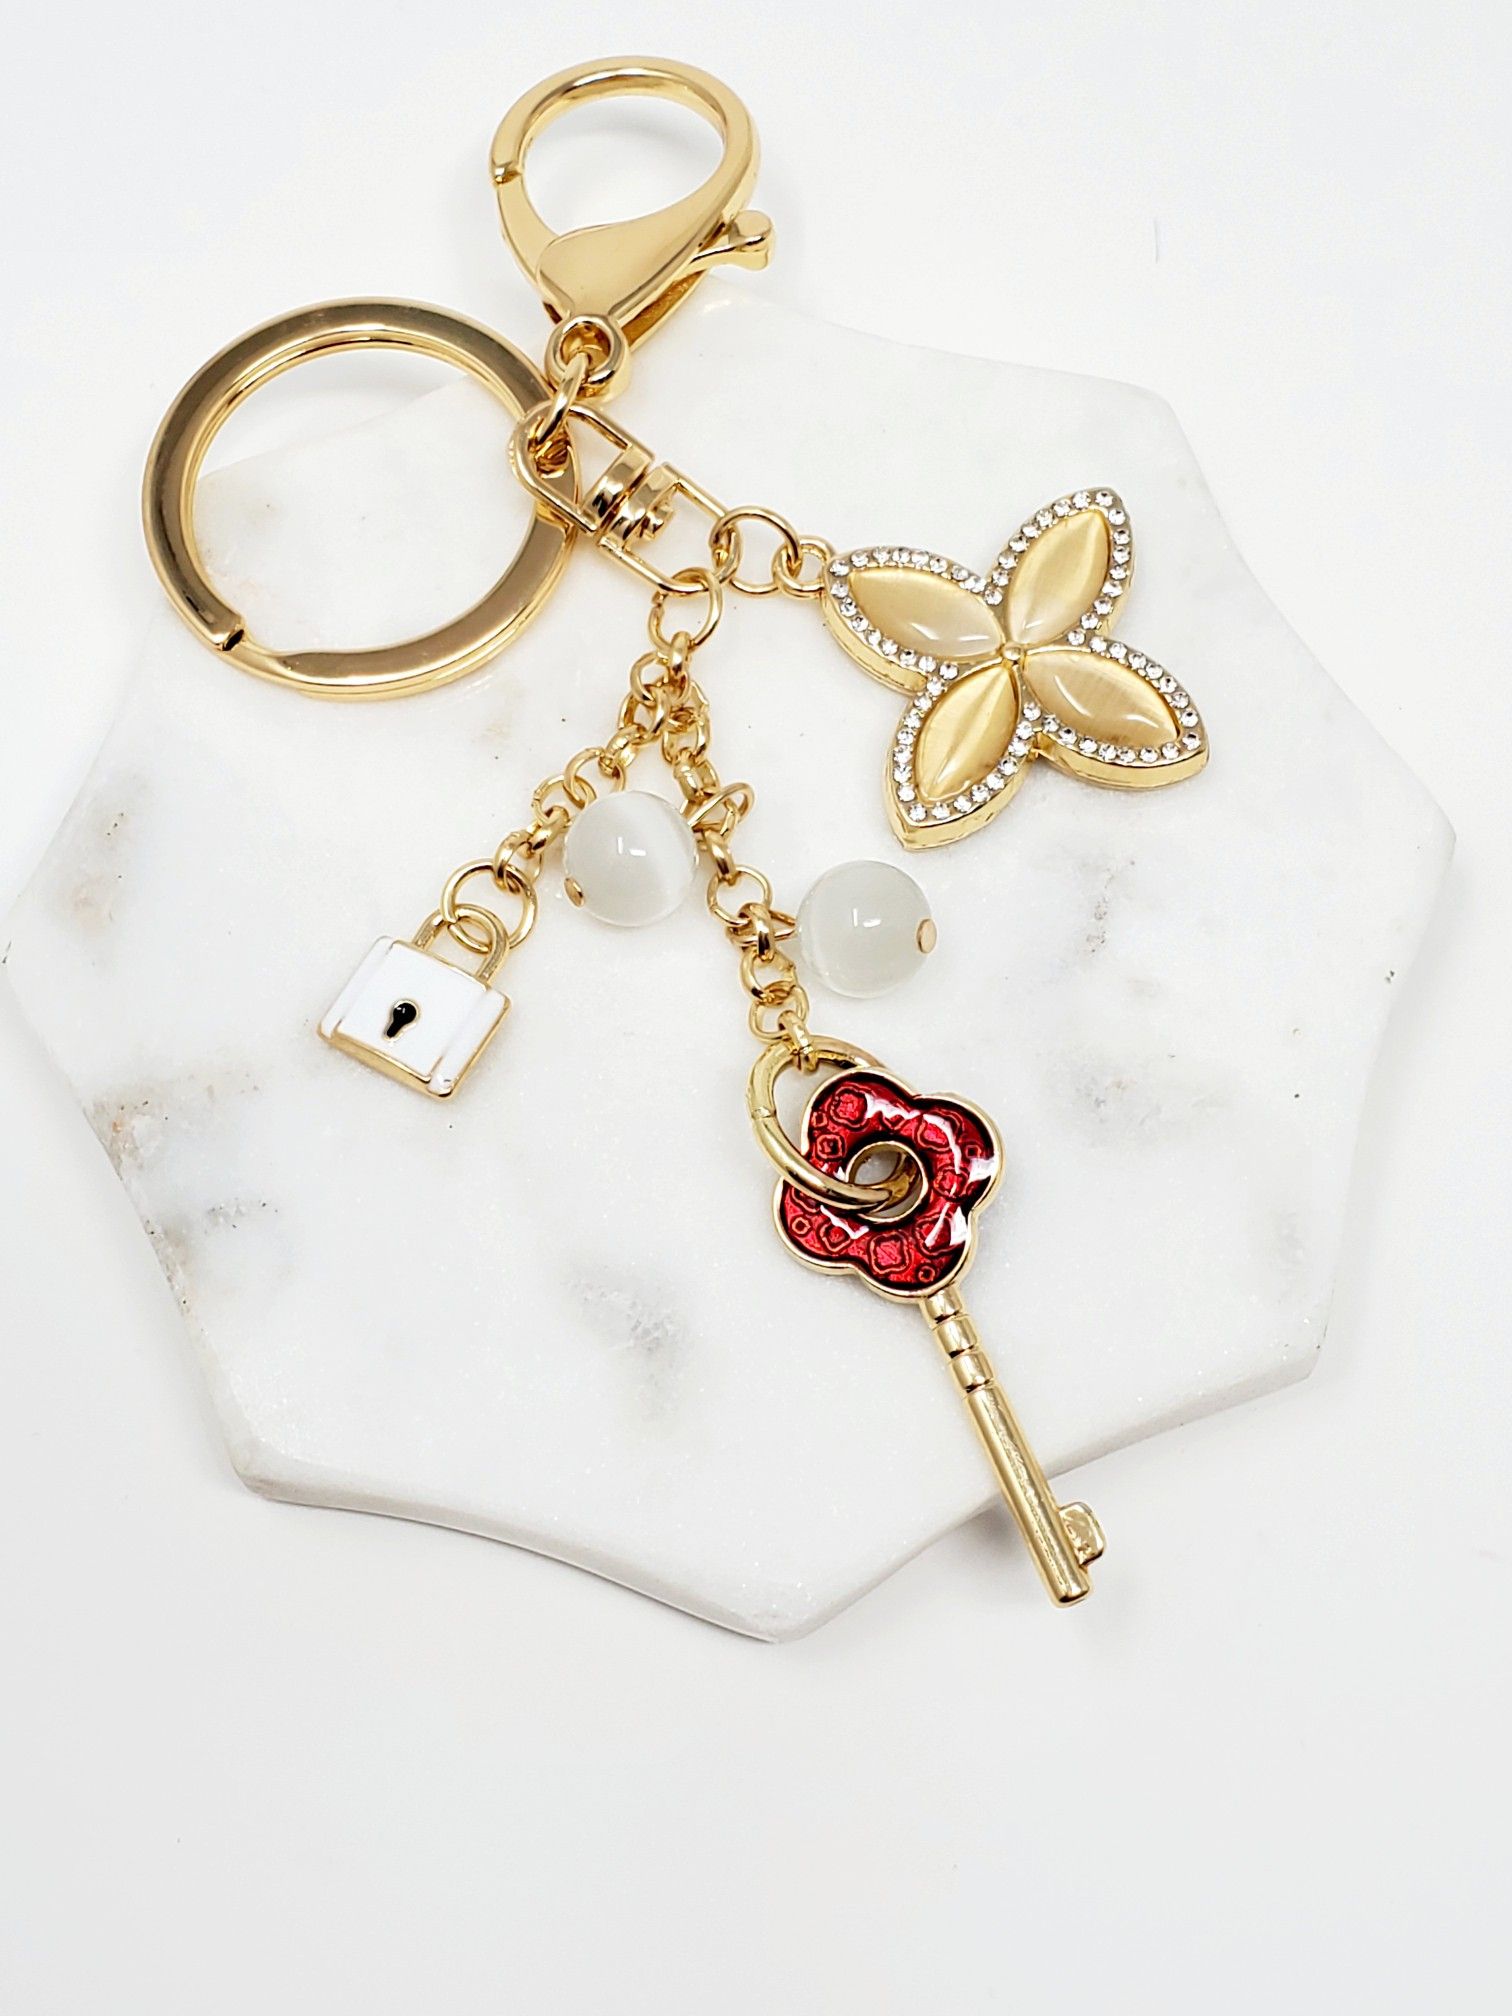 Bling keychain bagcharm with red key, clover, lock charm